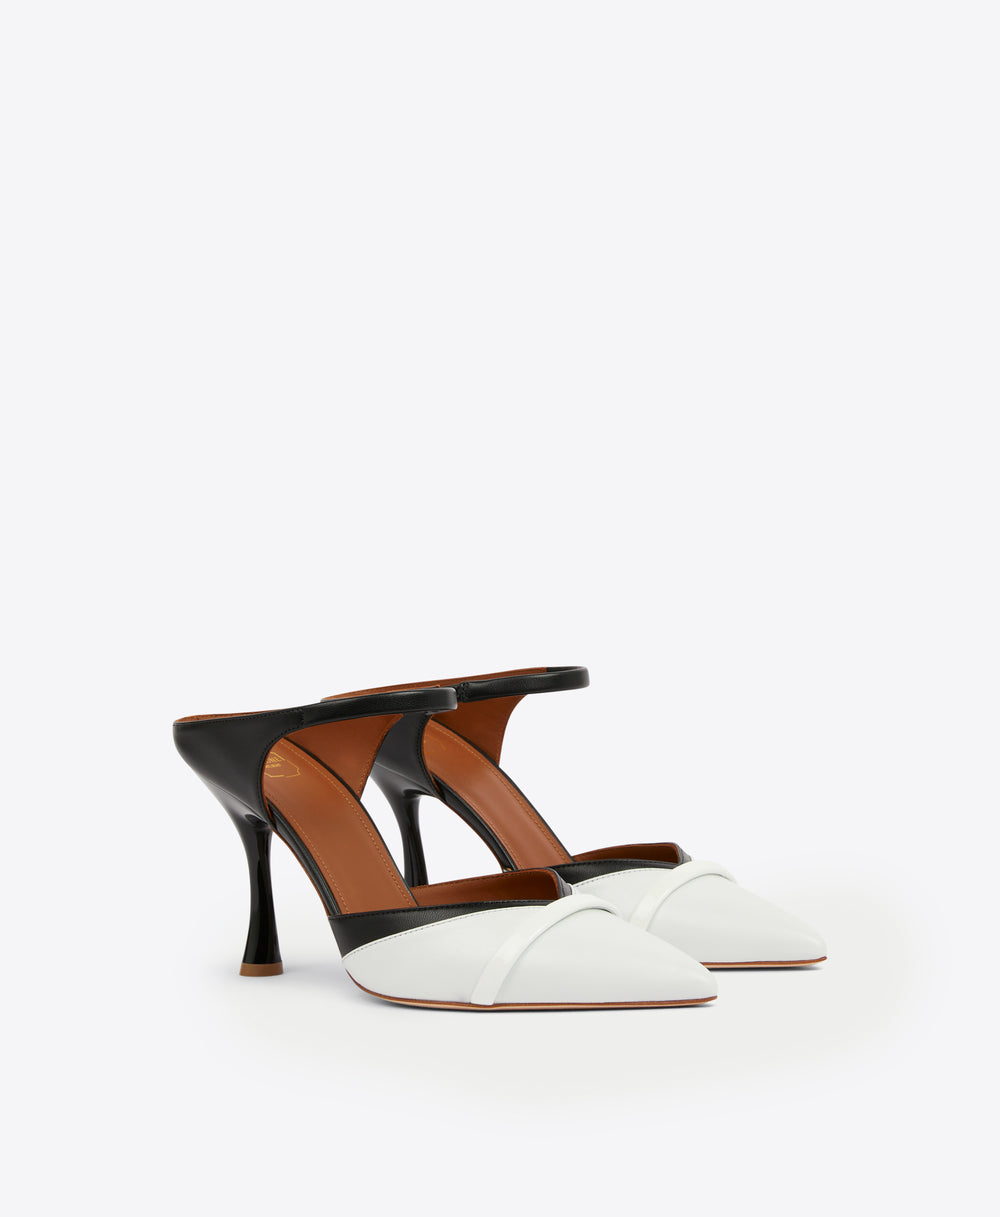 Women's Black and White Leather Heeled Mules Malone Souliers